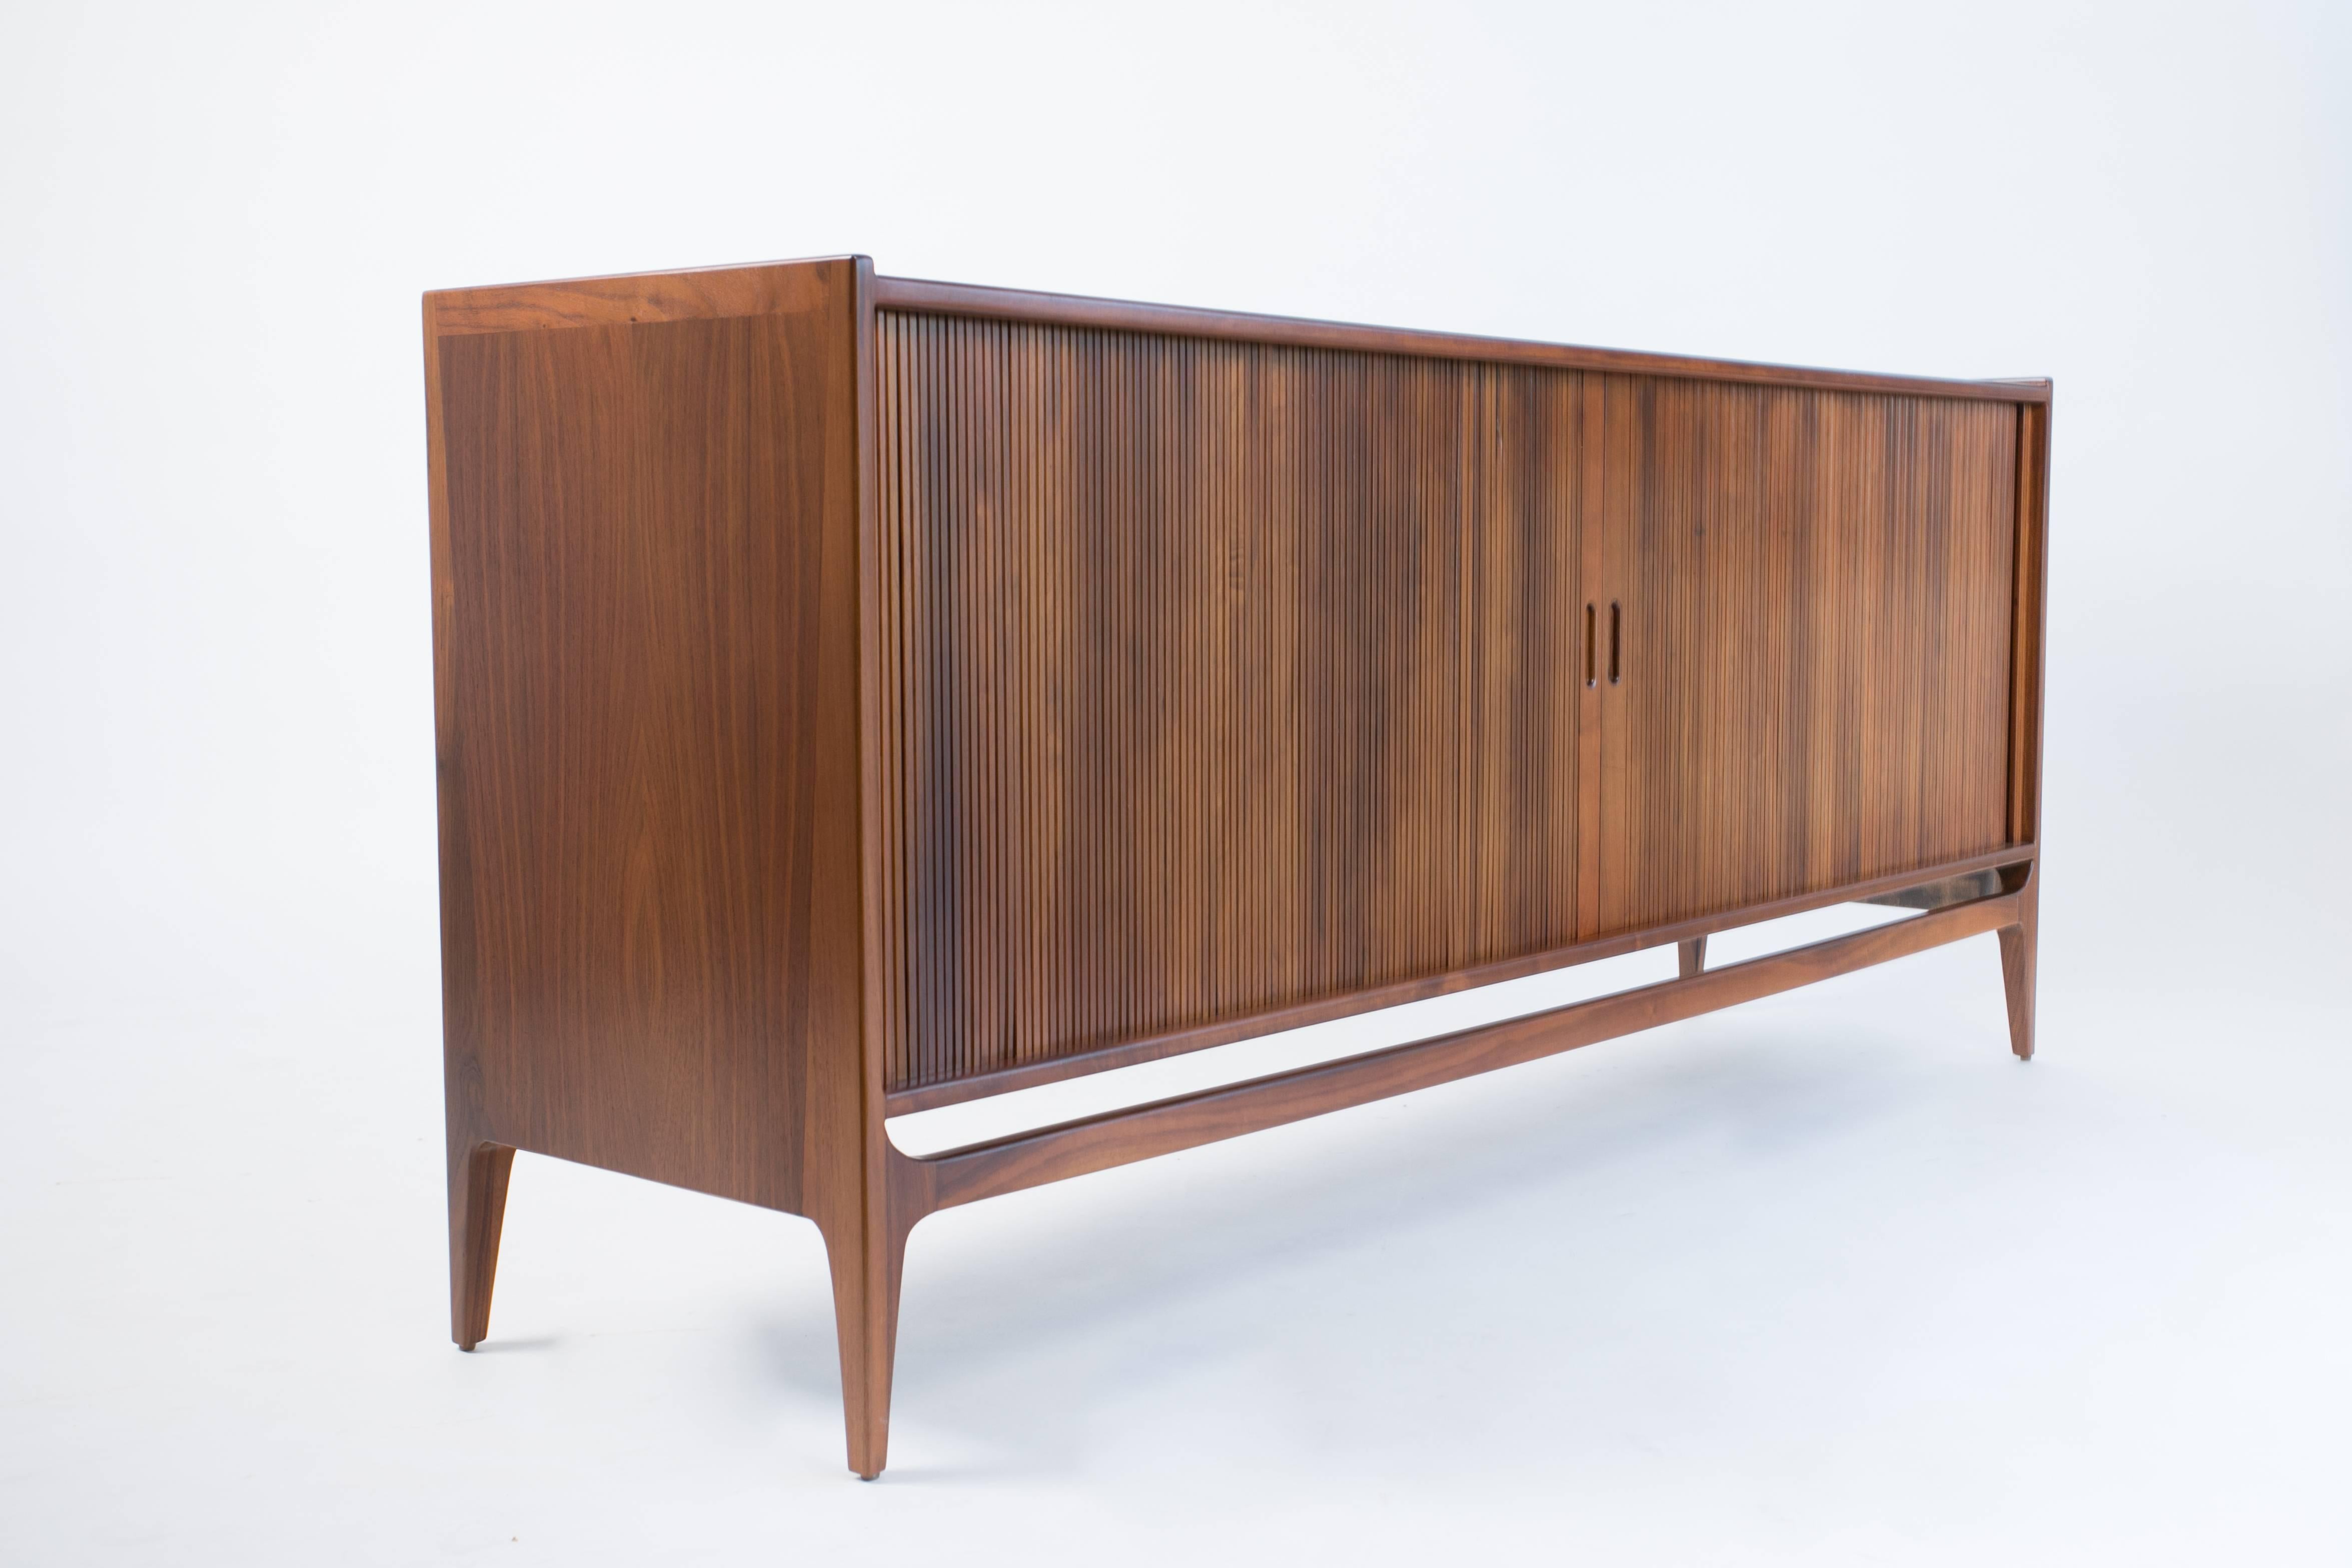 A dark walnut credenza by Richard Thompson for Glenn of California with tambour doors and modular interior shelving. The tapered legs of the piece sit flush with the walnut case, and the tambour doors with recessed pulls open onto three storage